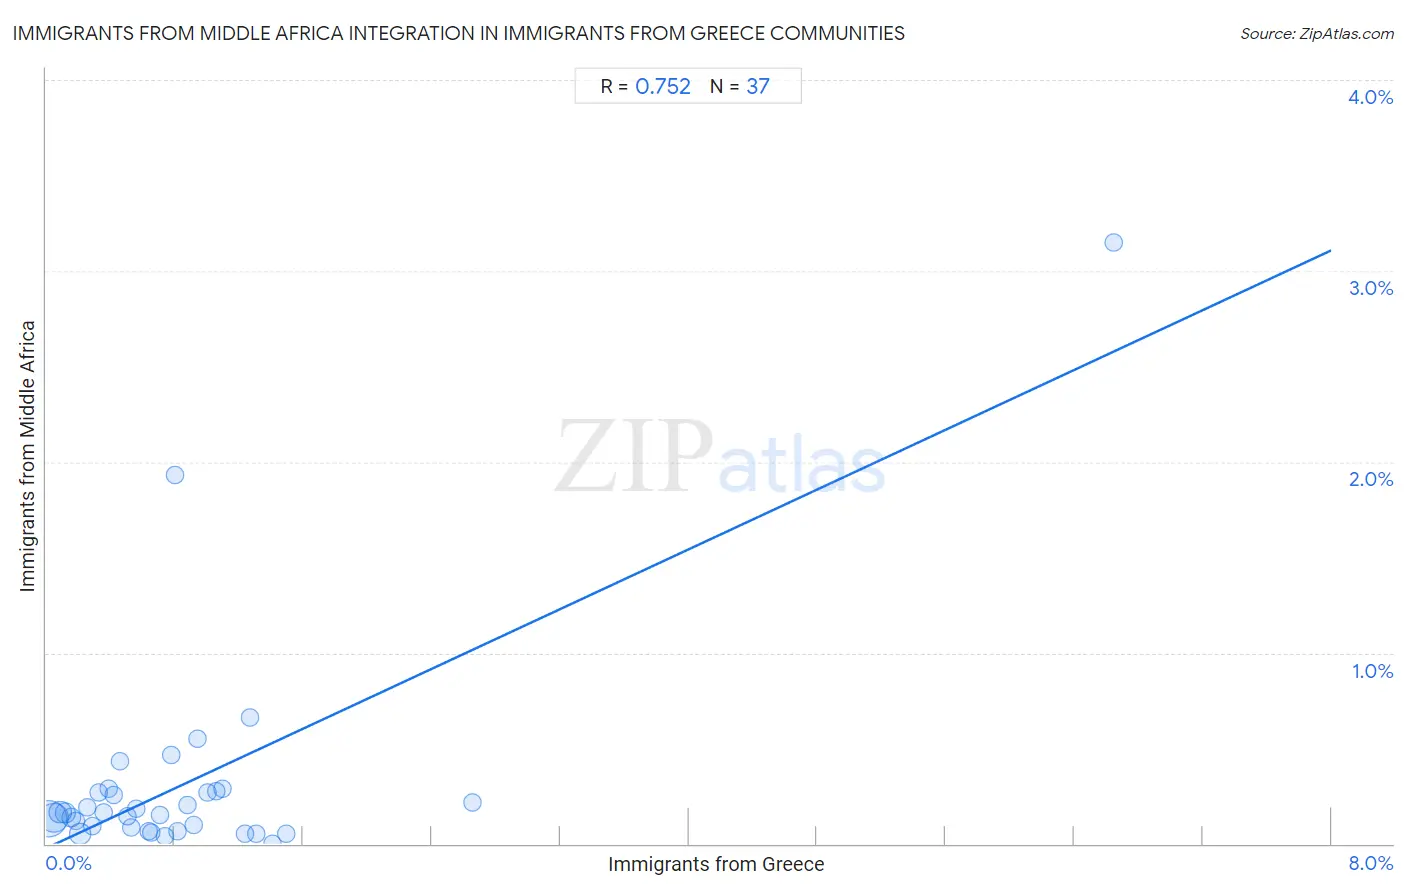 Immigrants from Greece Integration in Immigrants from Middle Africa Communities